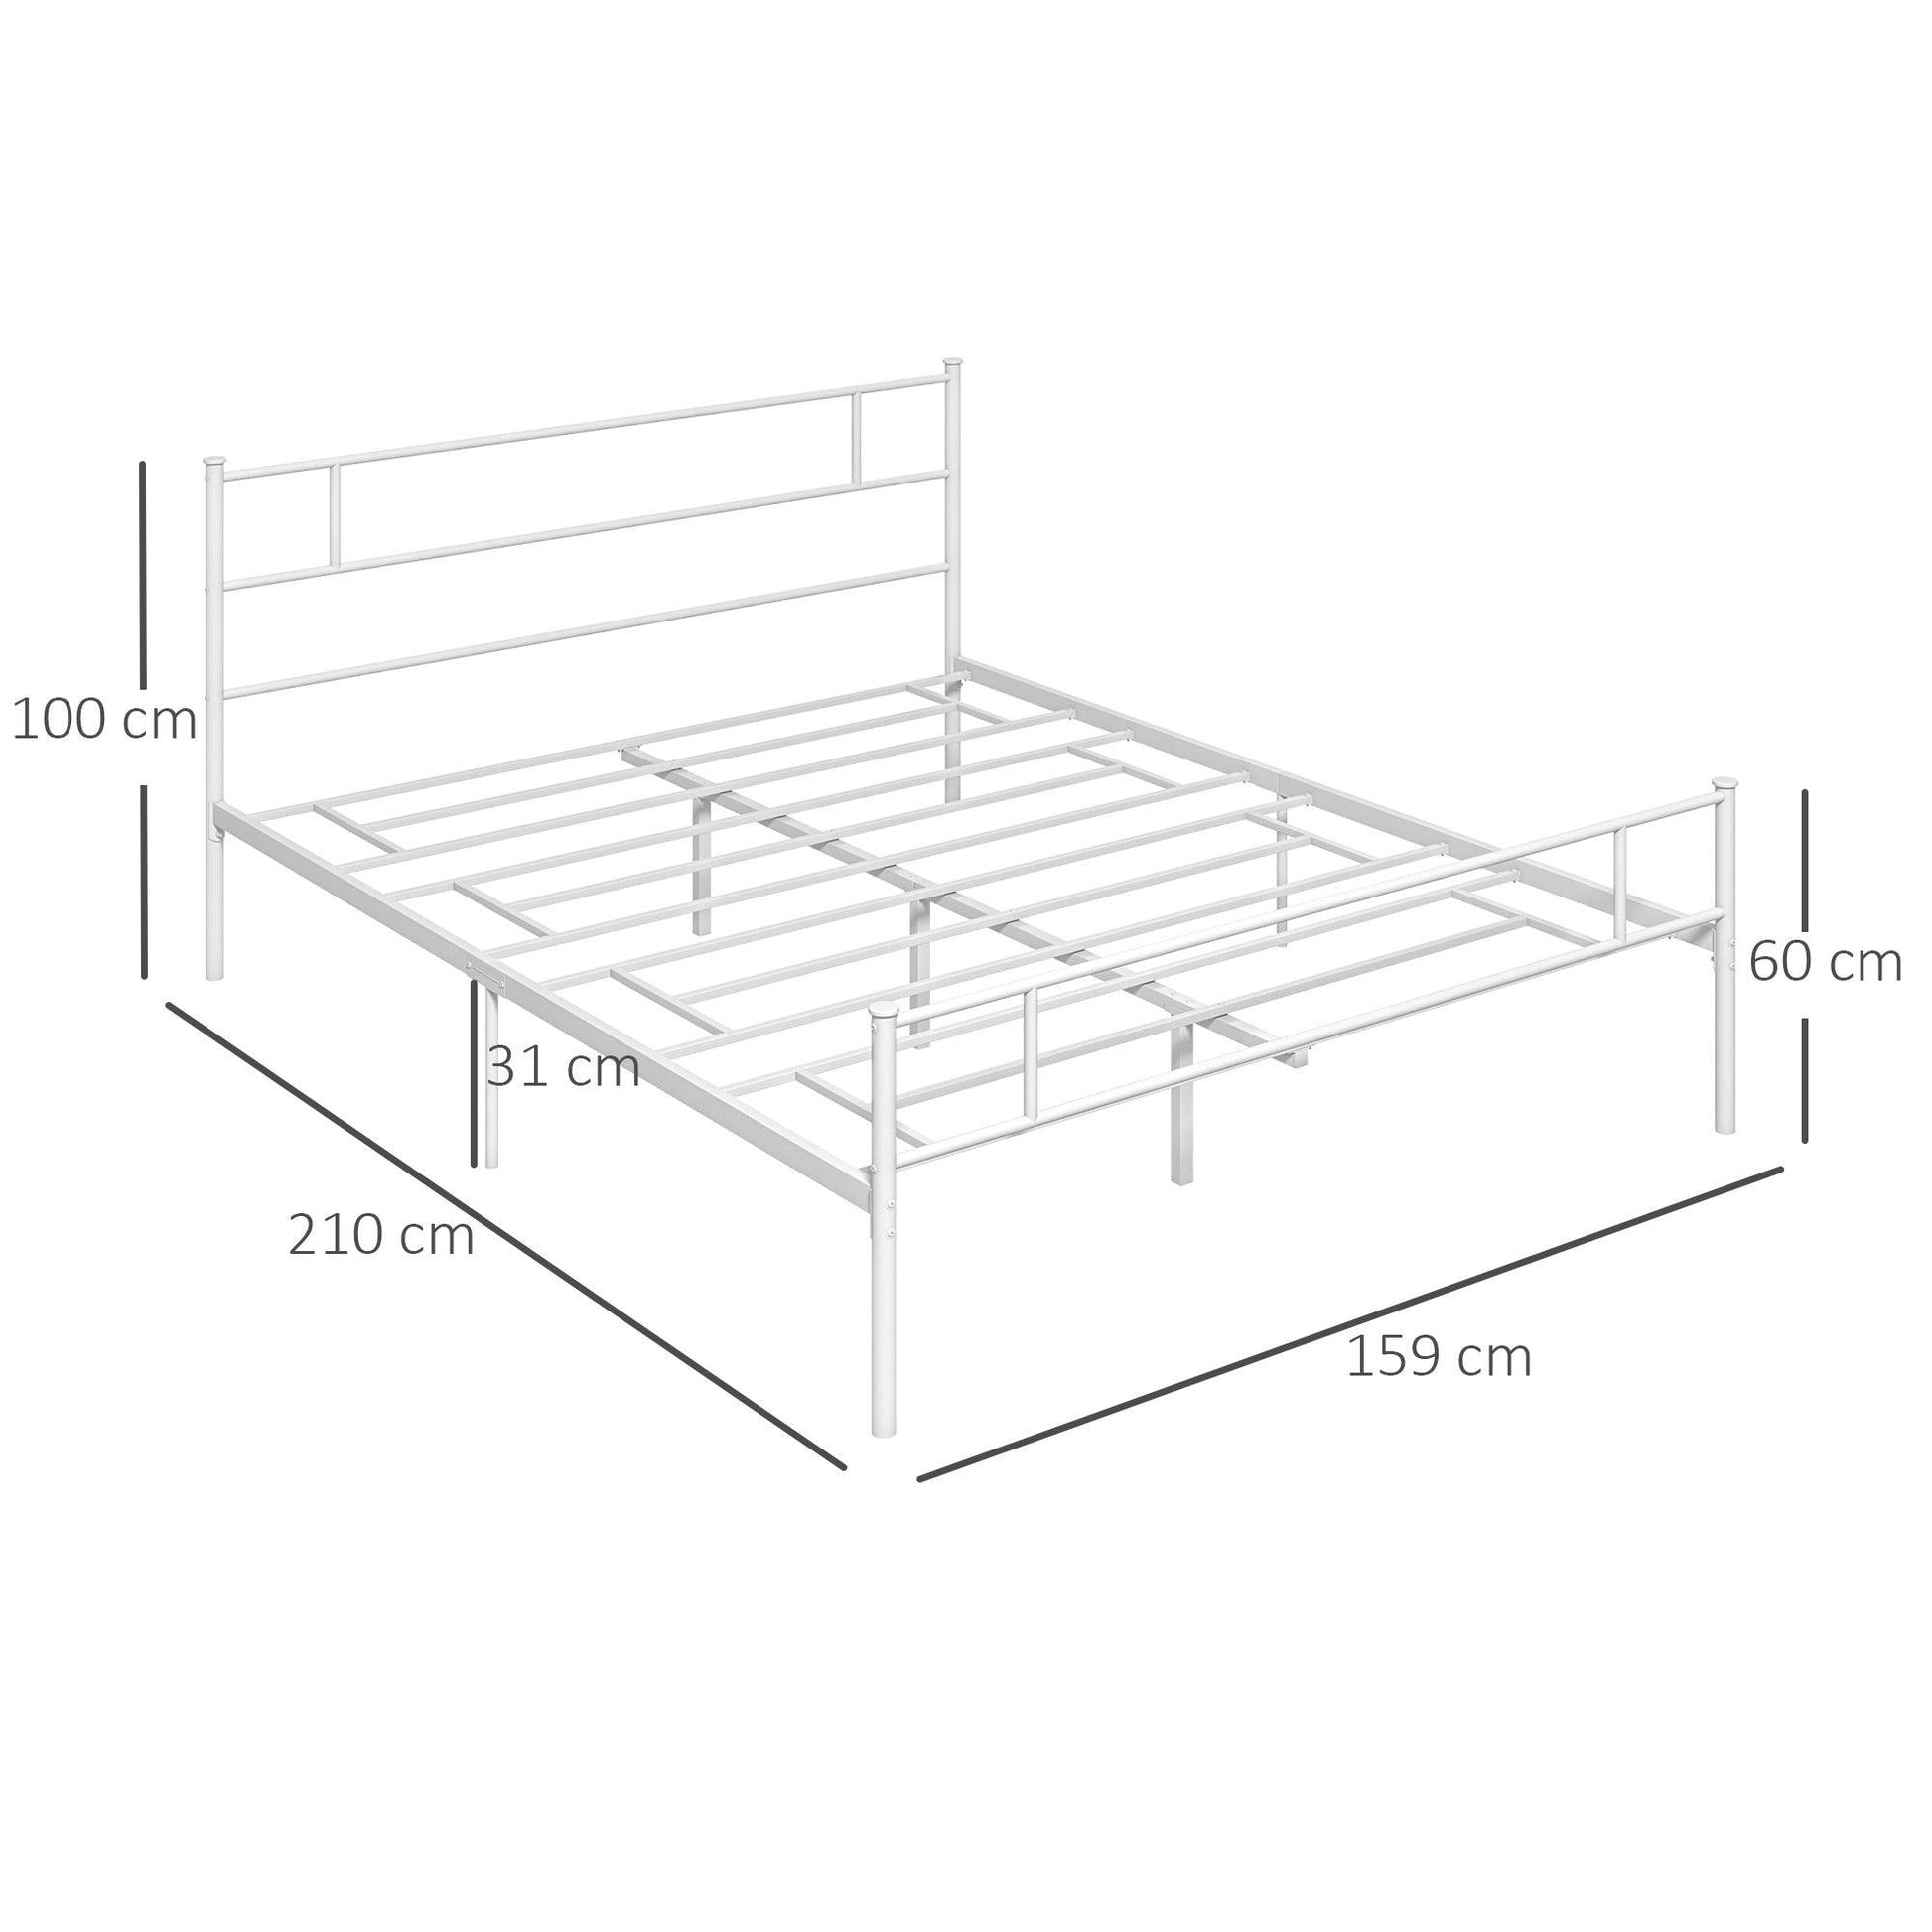 HOMCOM King Bed Frame, Metal Bed Base with Headboard and Footboard, Metal Slat Support and 31cm Underbed Storage Space - ALL4U RETAILER LTD